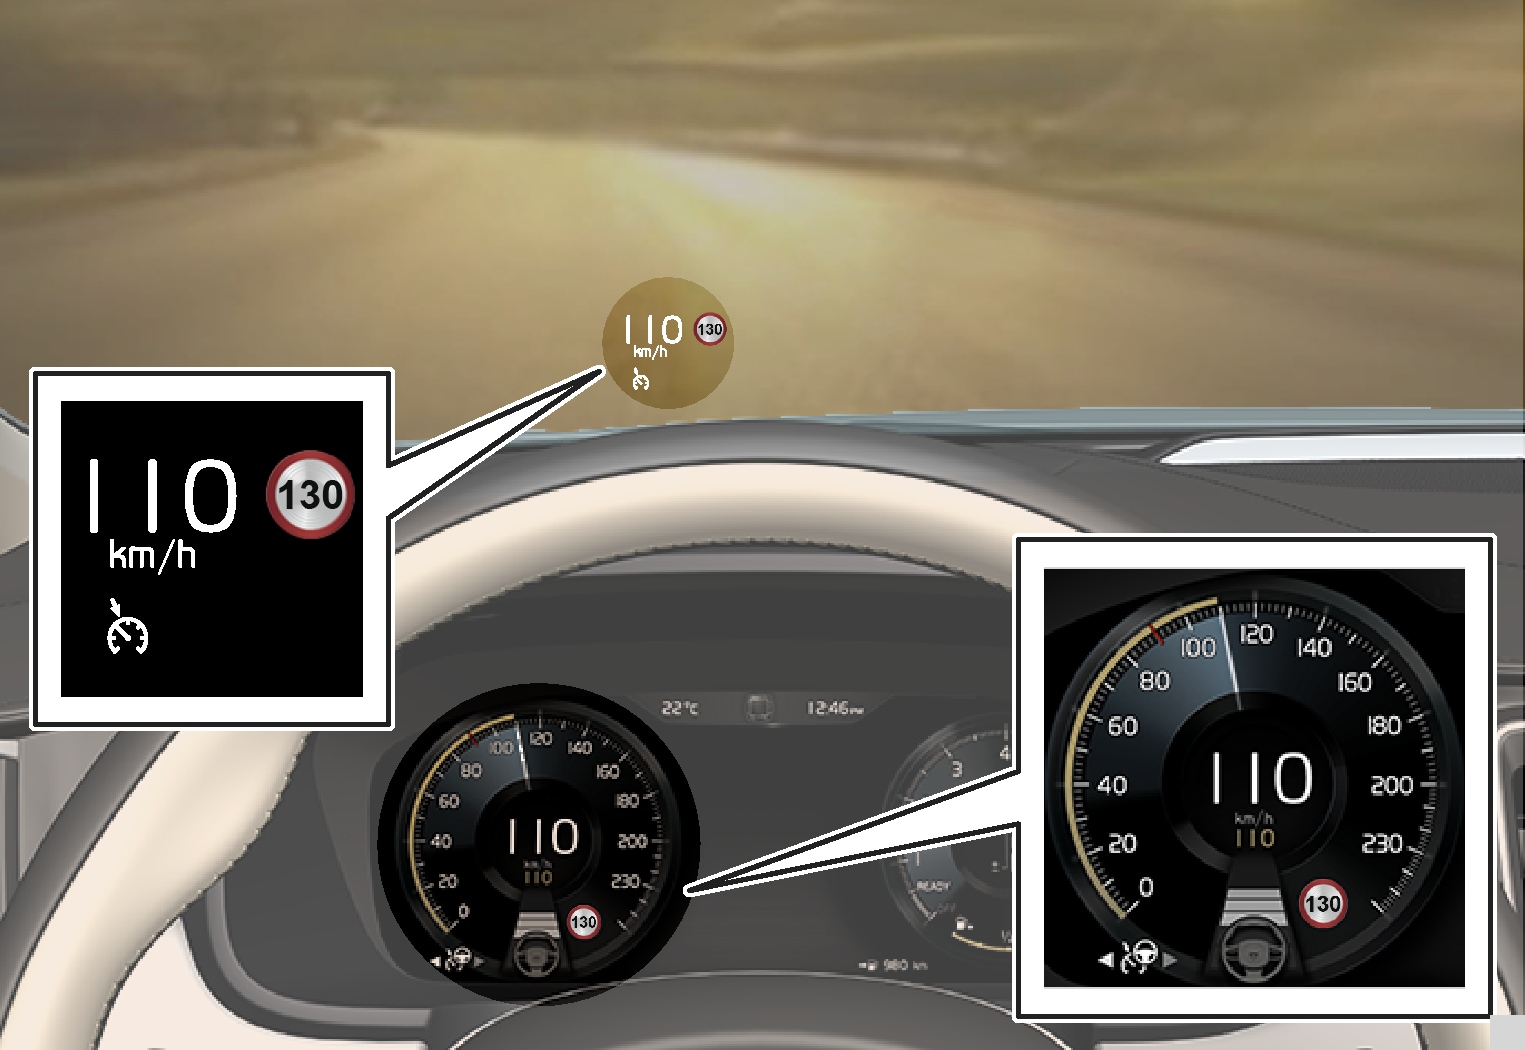 P5-S90/V90-1617-Pilot Assist, Follows, set to maintain 110 km/h and to follow a vehicle ahead